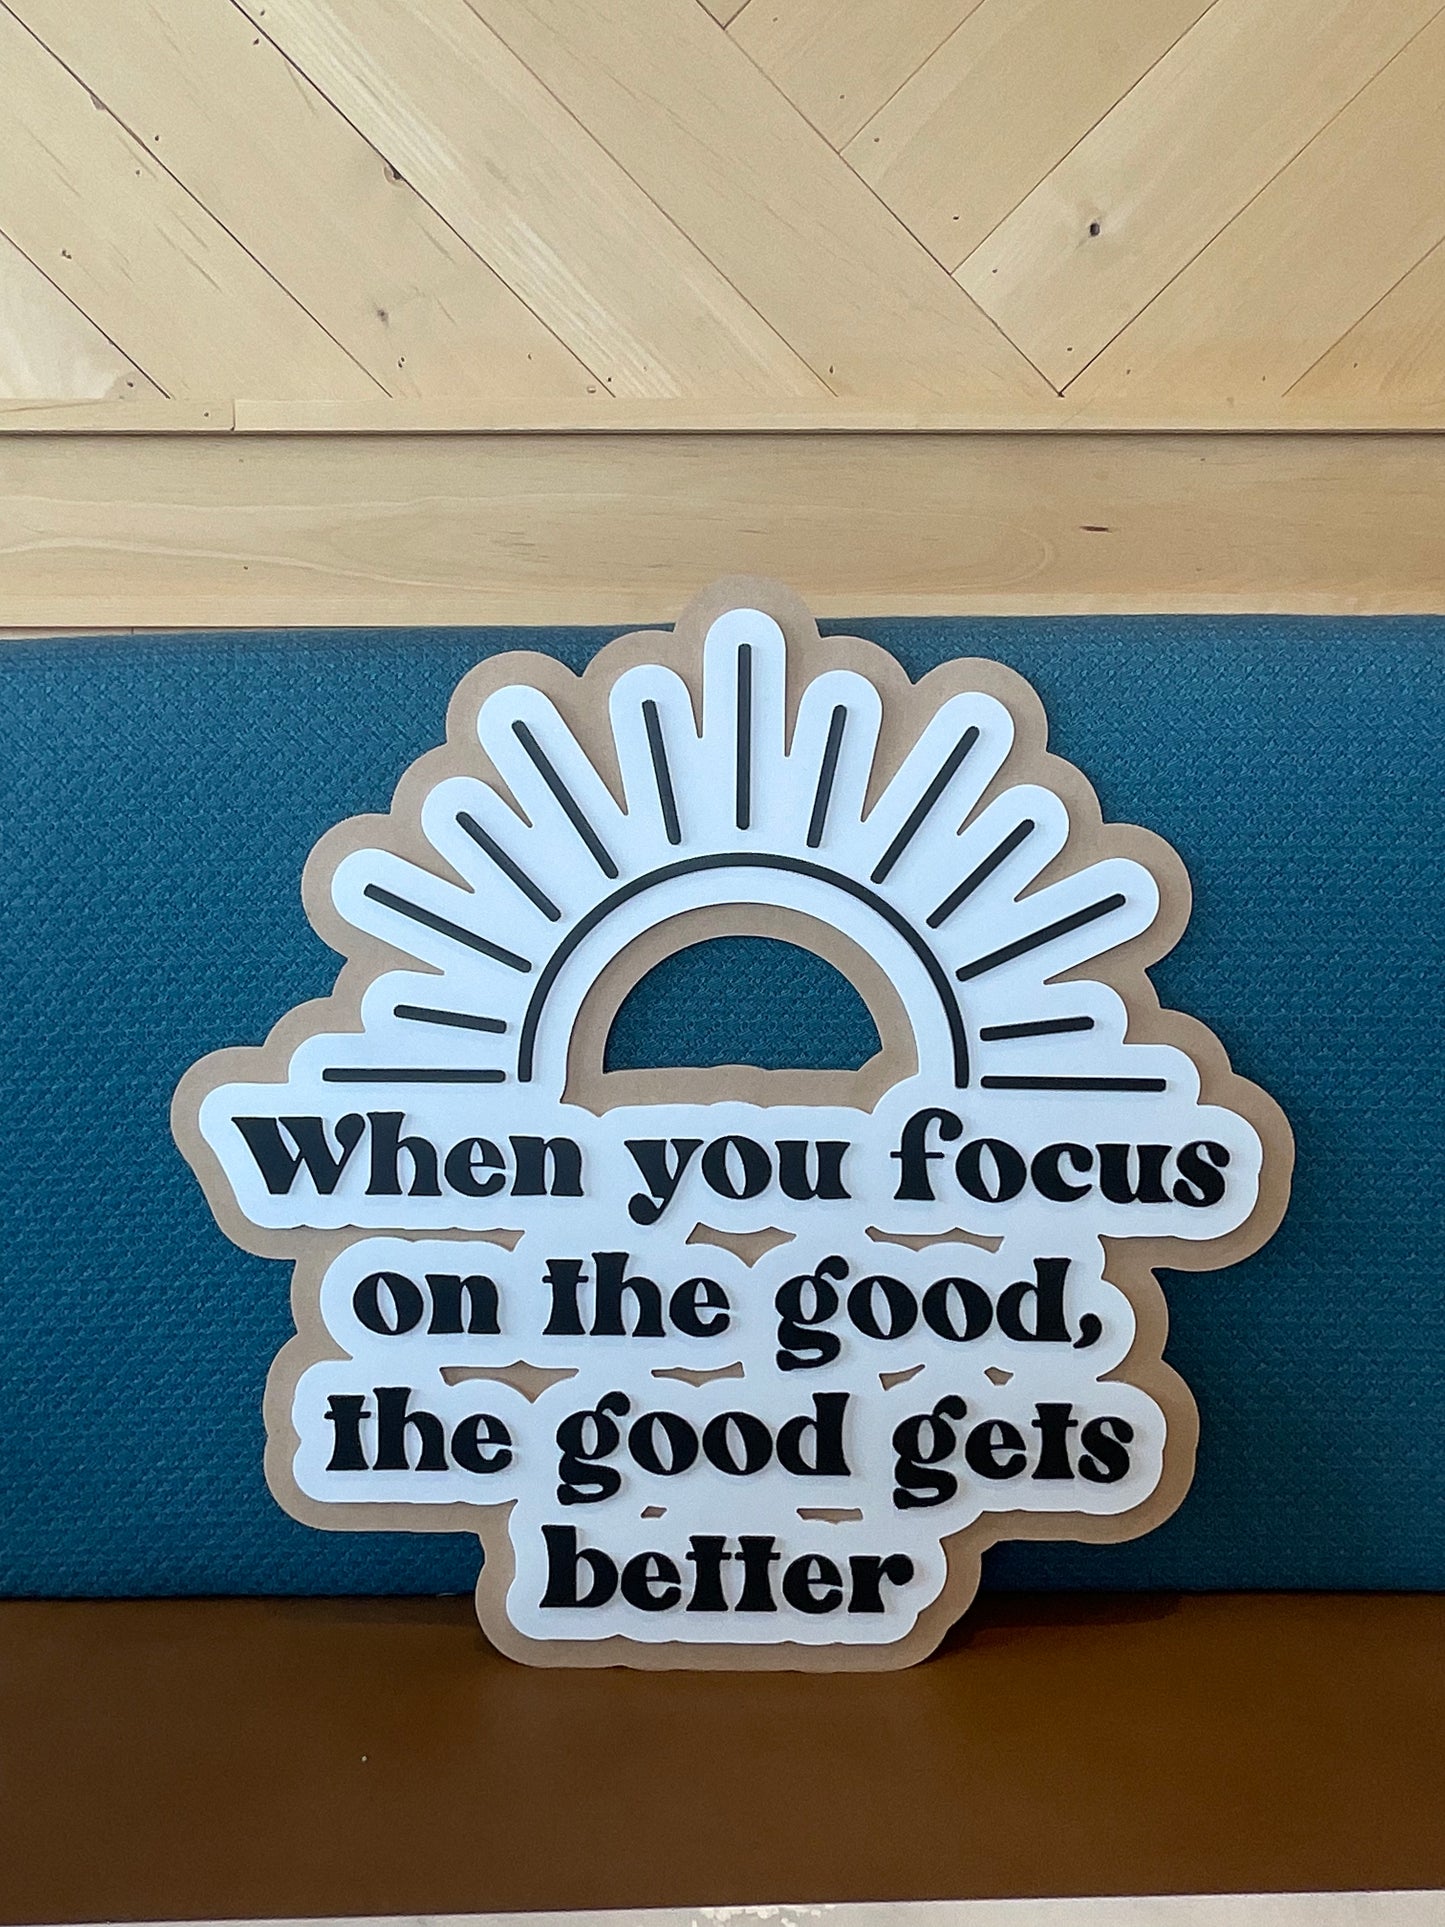 When you focus on the good